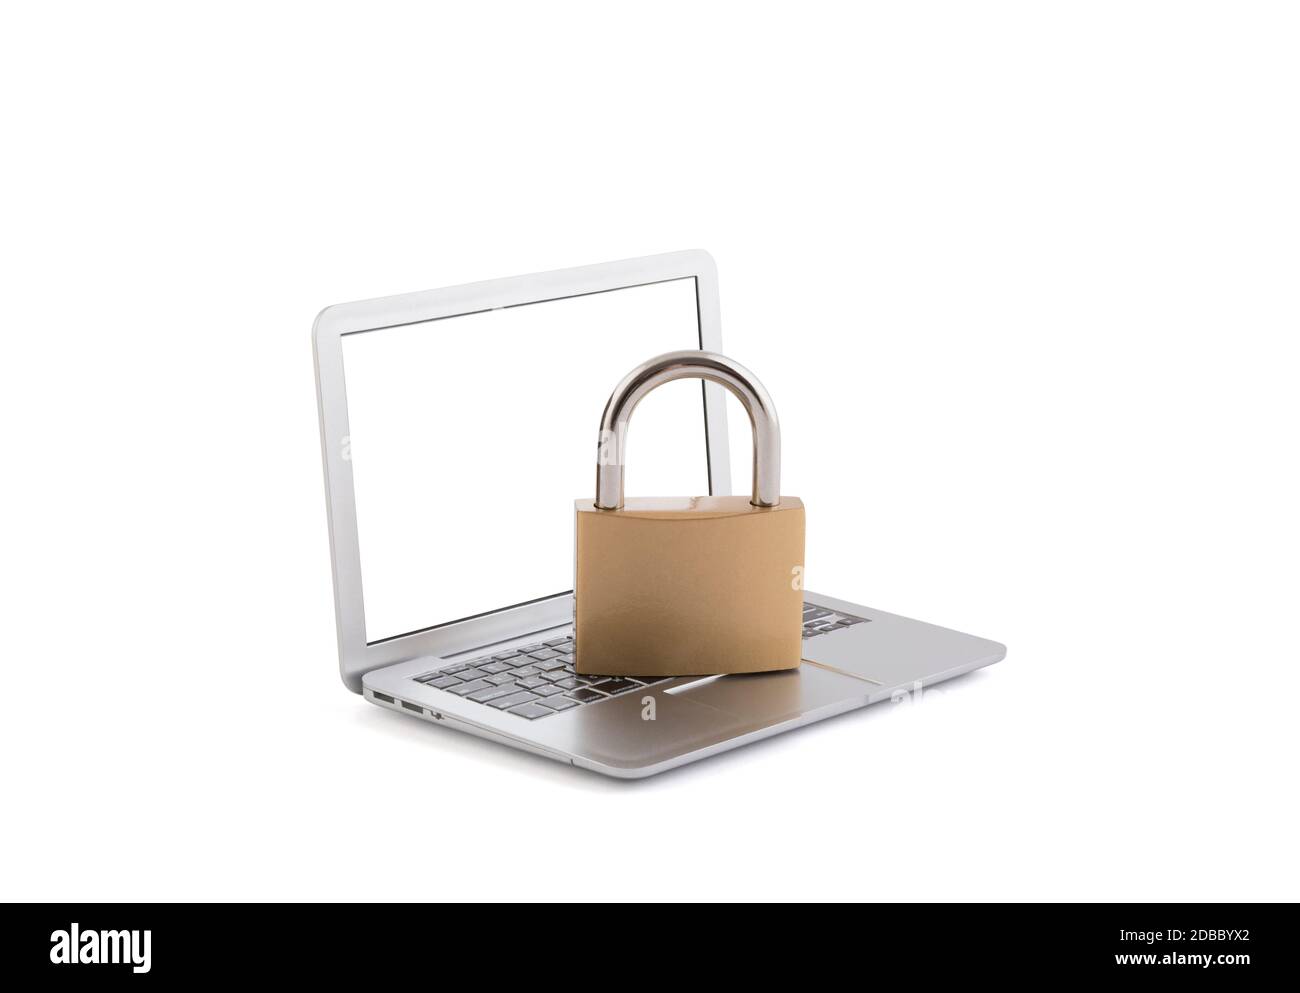 Computer security concept. Padlock on laptop isolated on white with clipping path Stock Photo